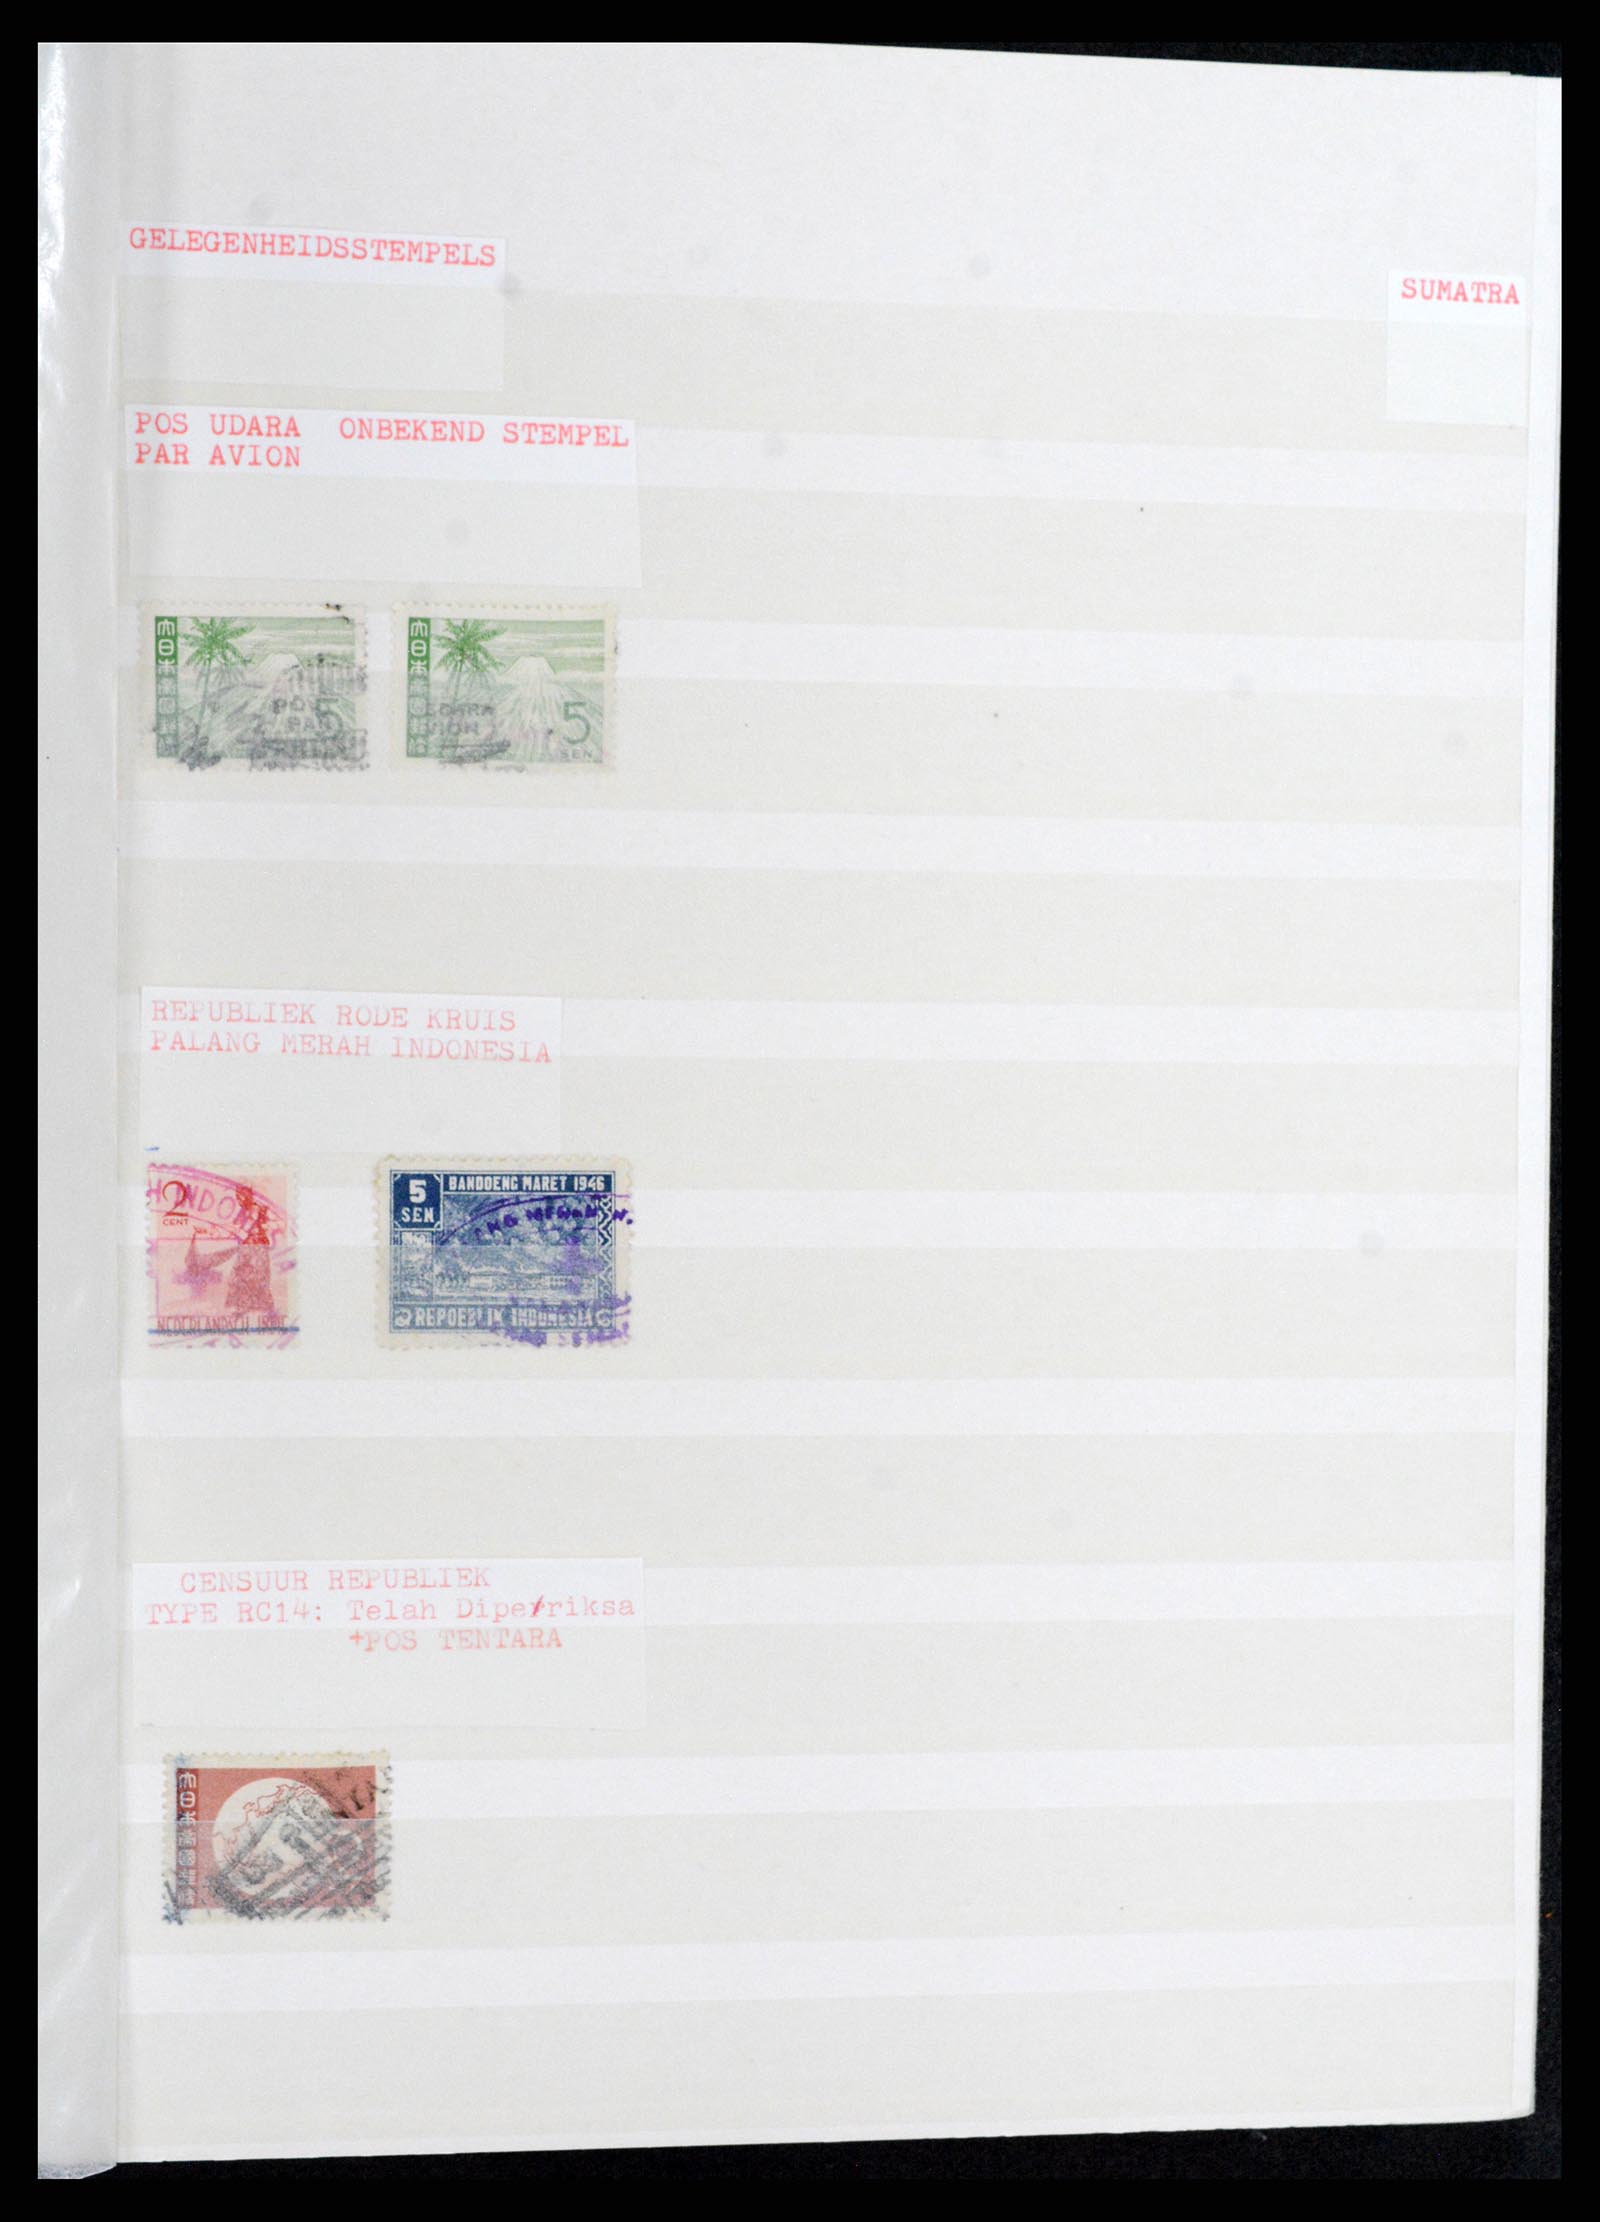 37692 177 - Stamp collection 37692 Indonesia interimperiod 1945-1499.